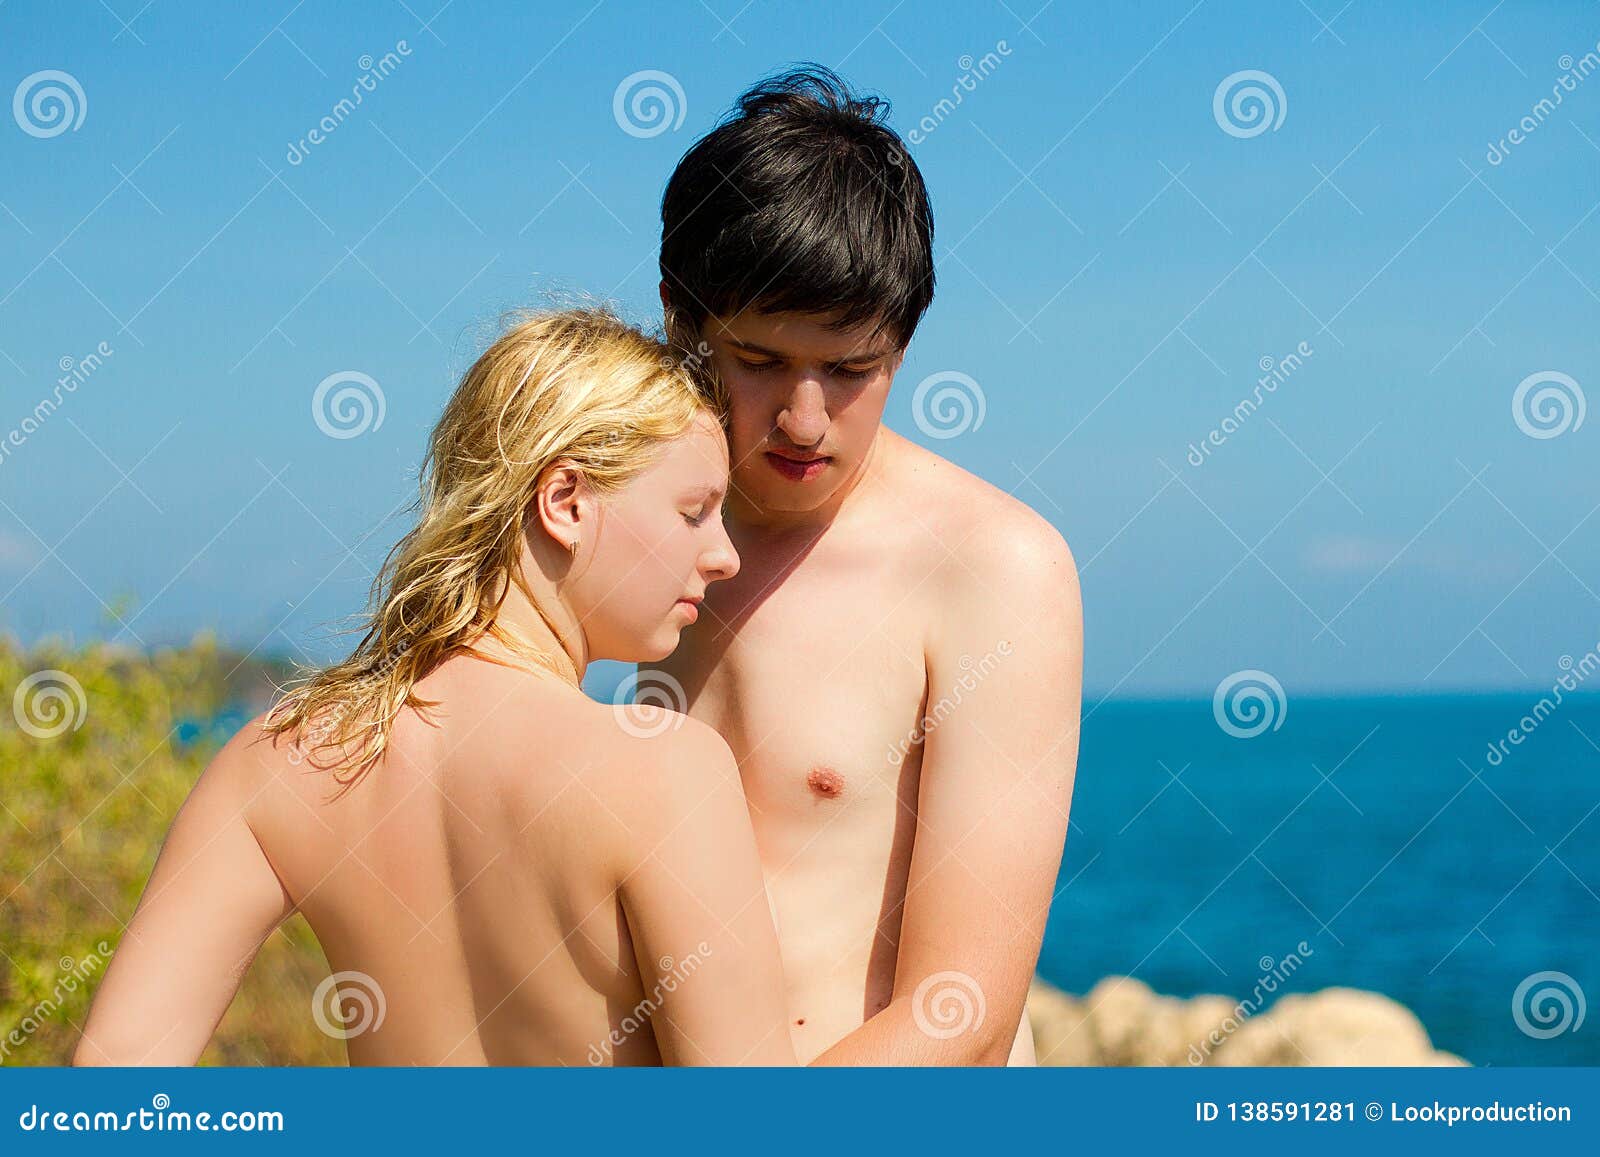 Naked Couples Beach